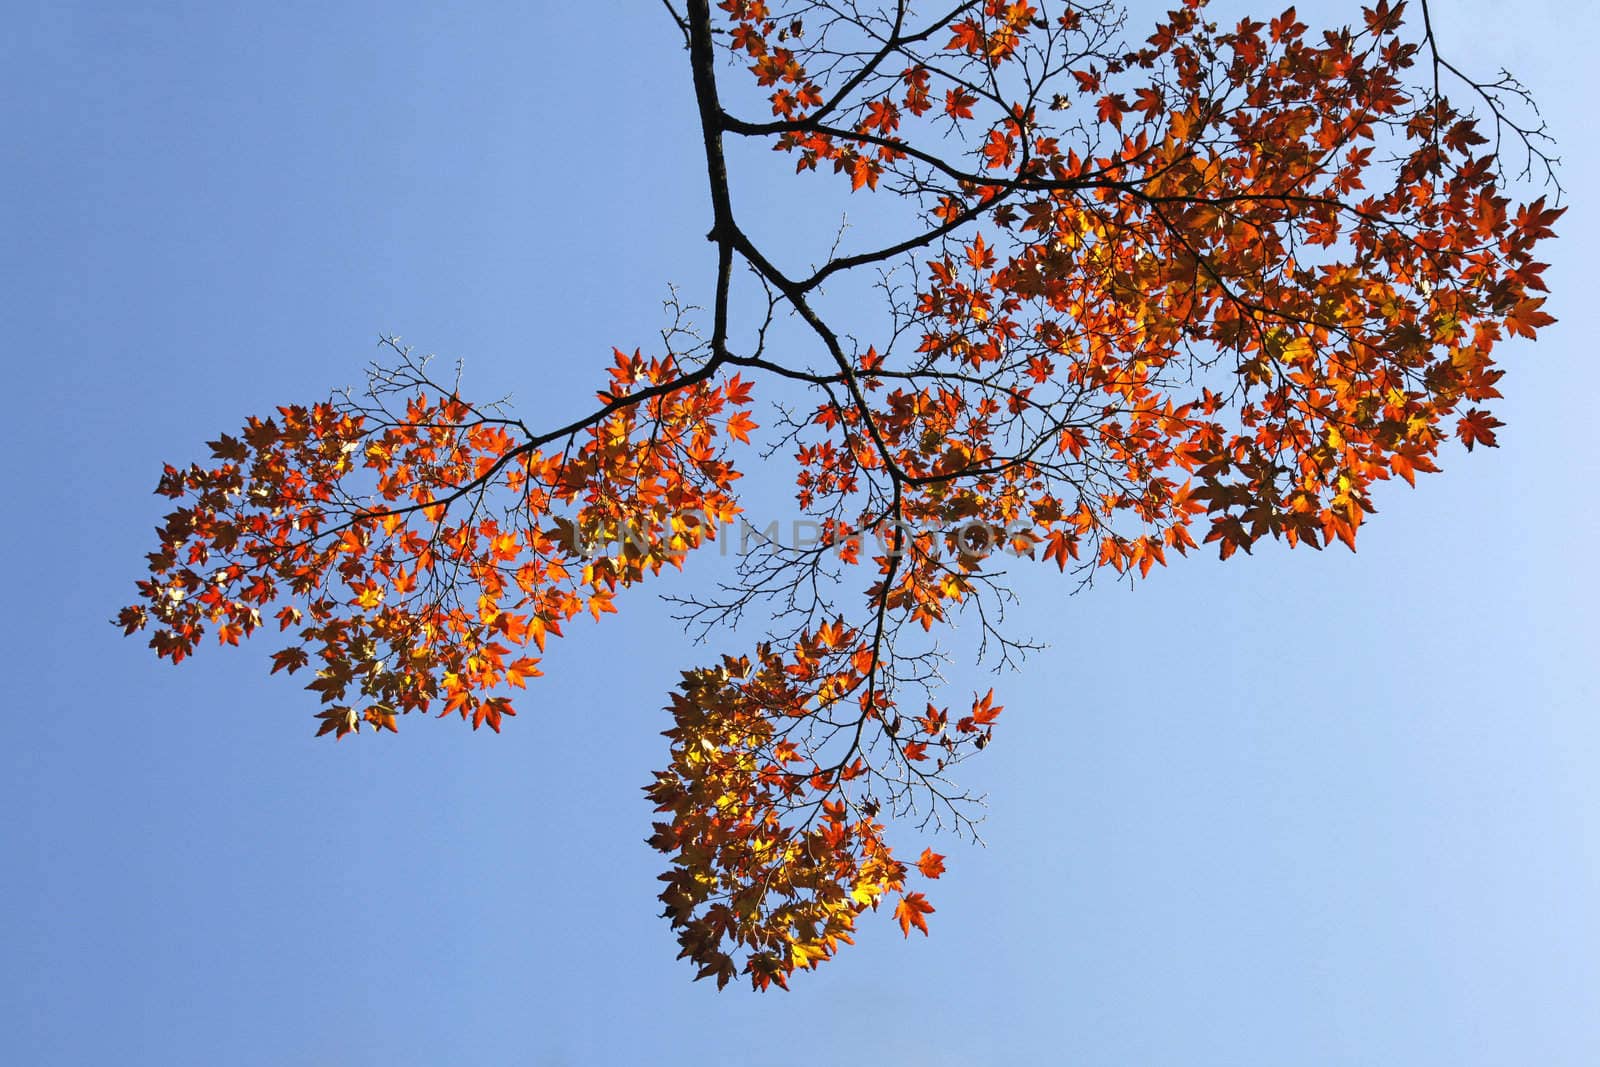 branch of maple tree with orange leaves in autumn and blue sky